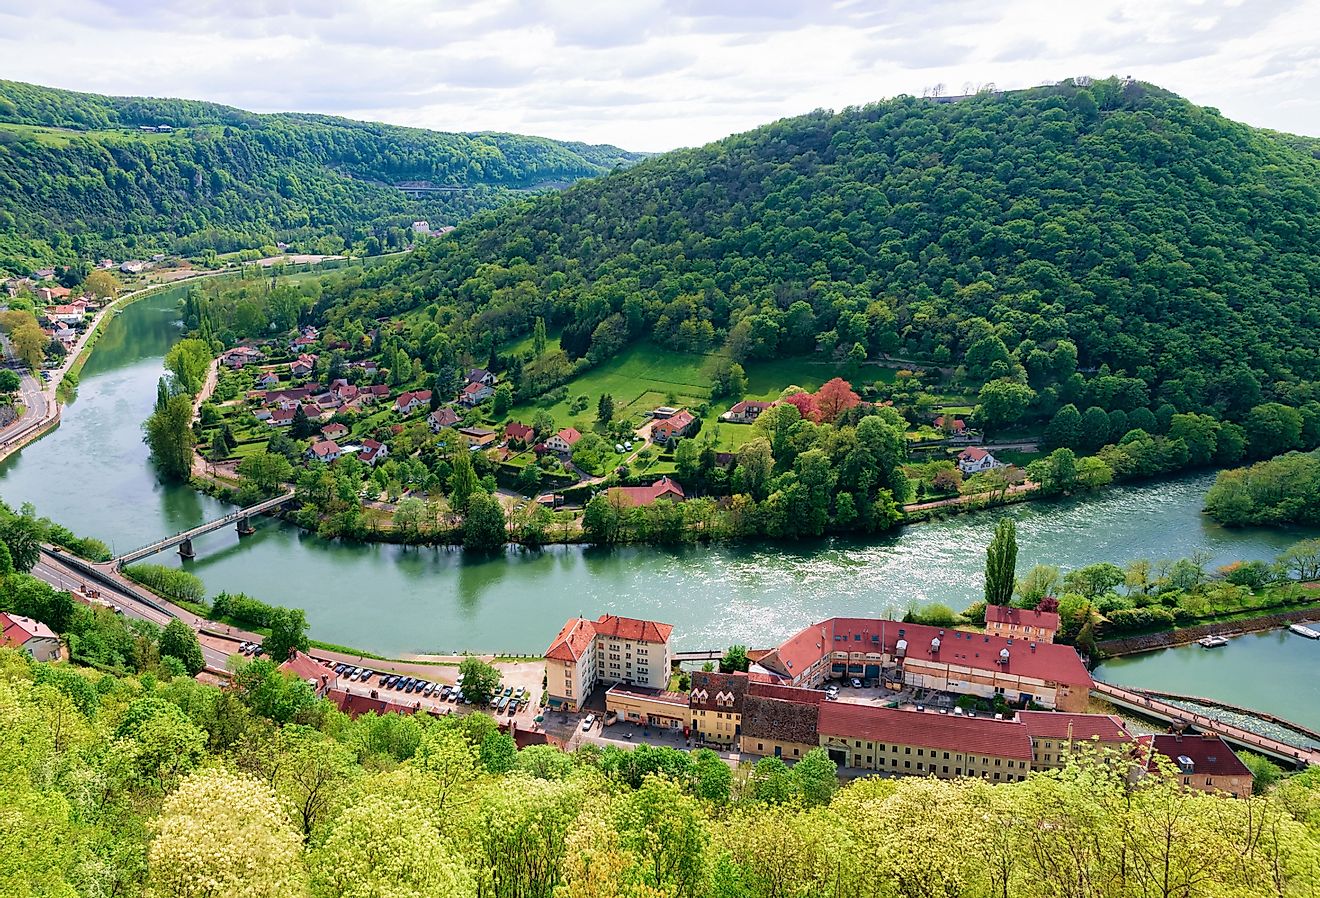 Landscape from Citadel of Besancon with River Doubs in Bourgogne Franche-Comte region, France. French Castle and medieval stone fortress in Burgundy. Image credit Roman Babakin via Shutterstock. 